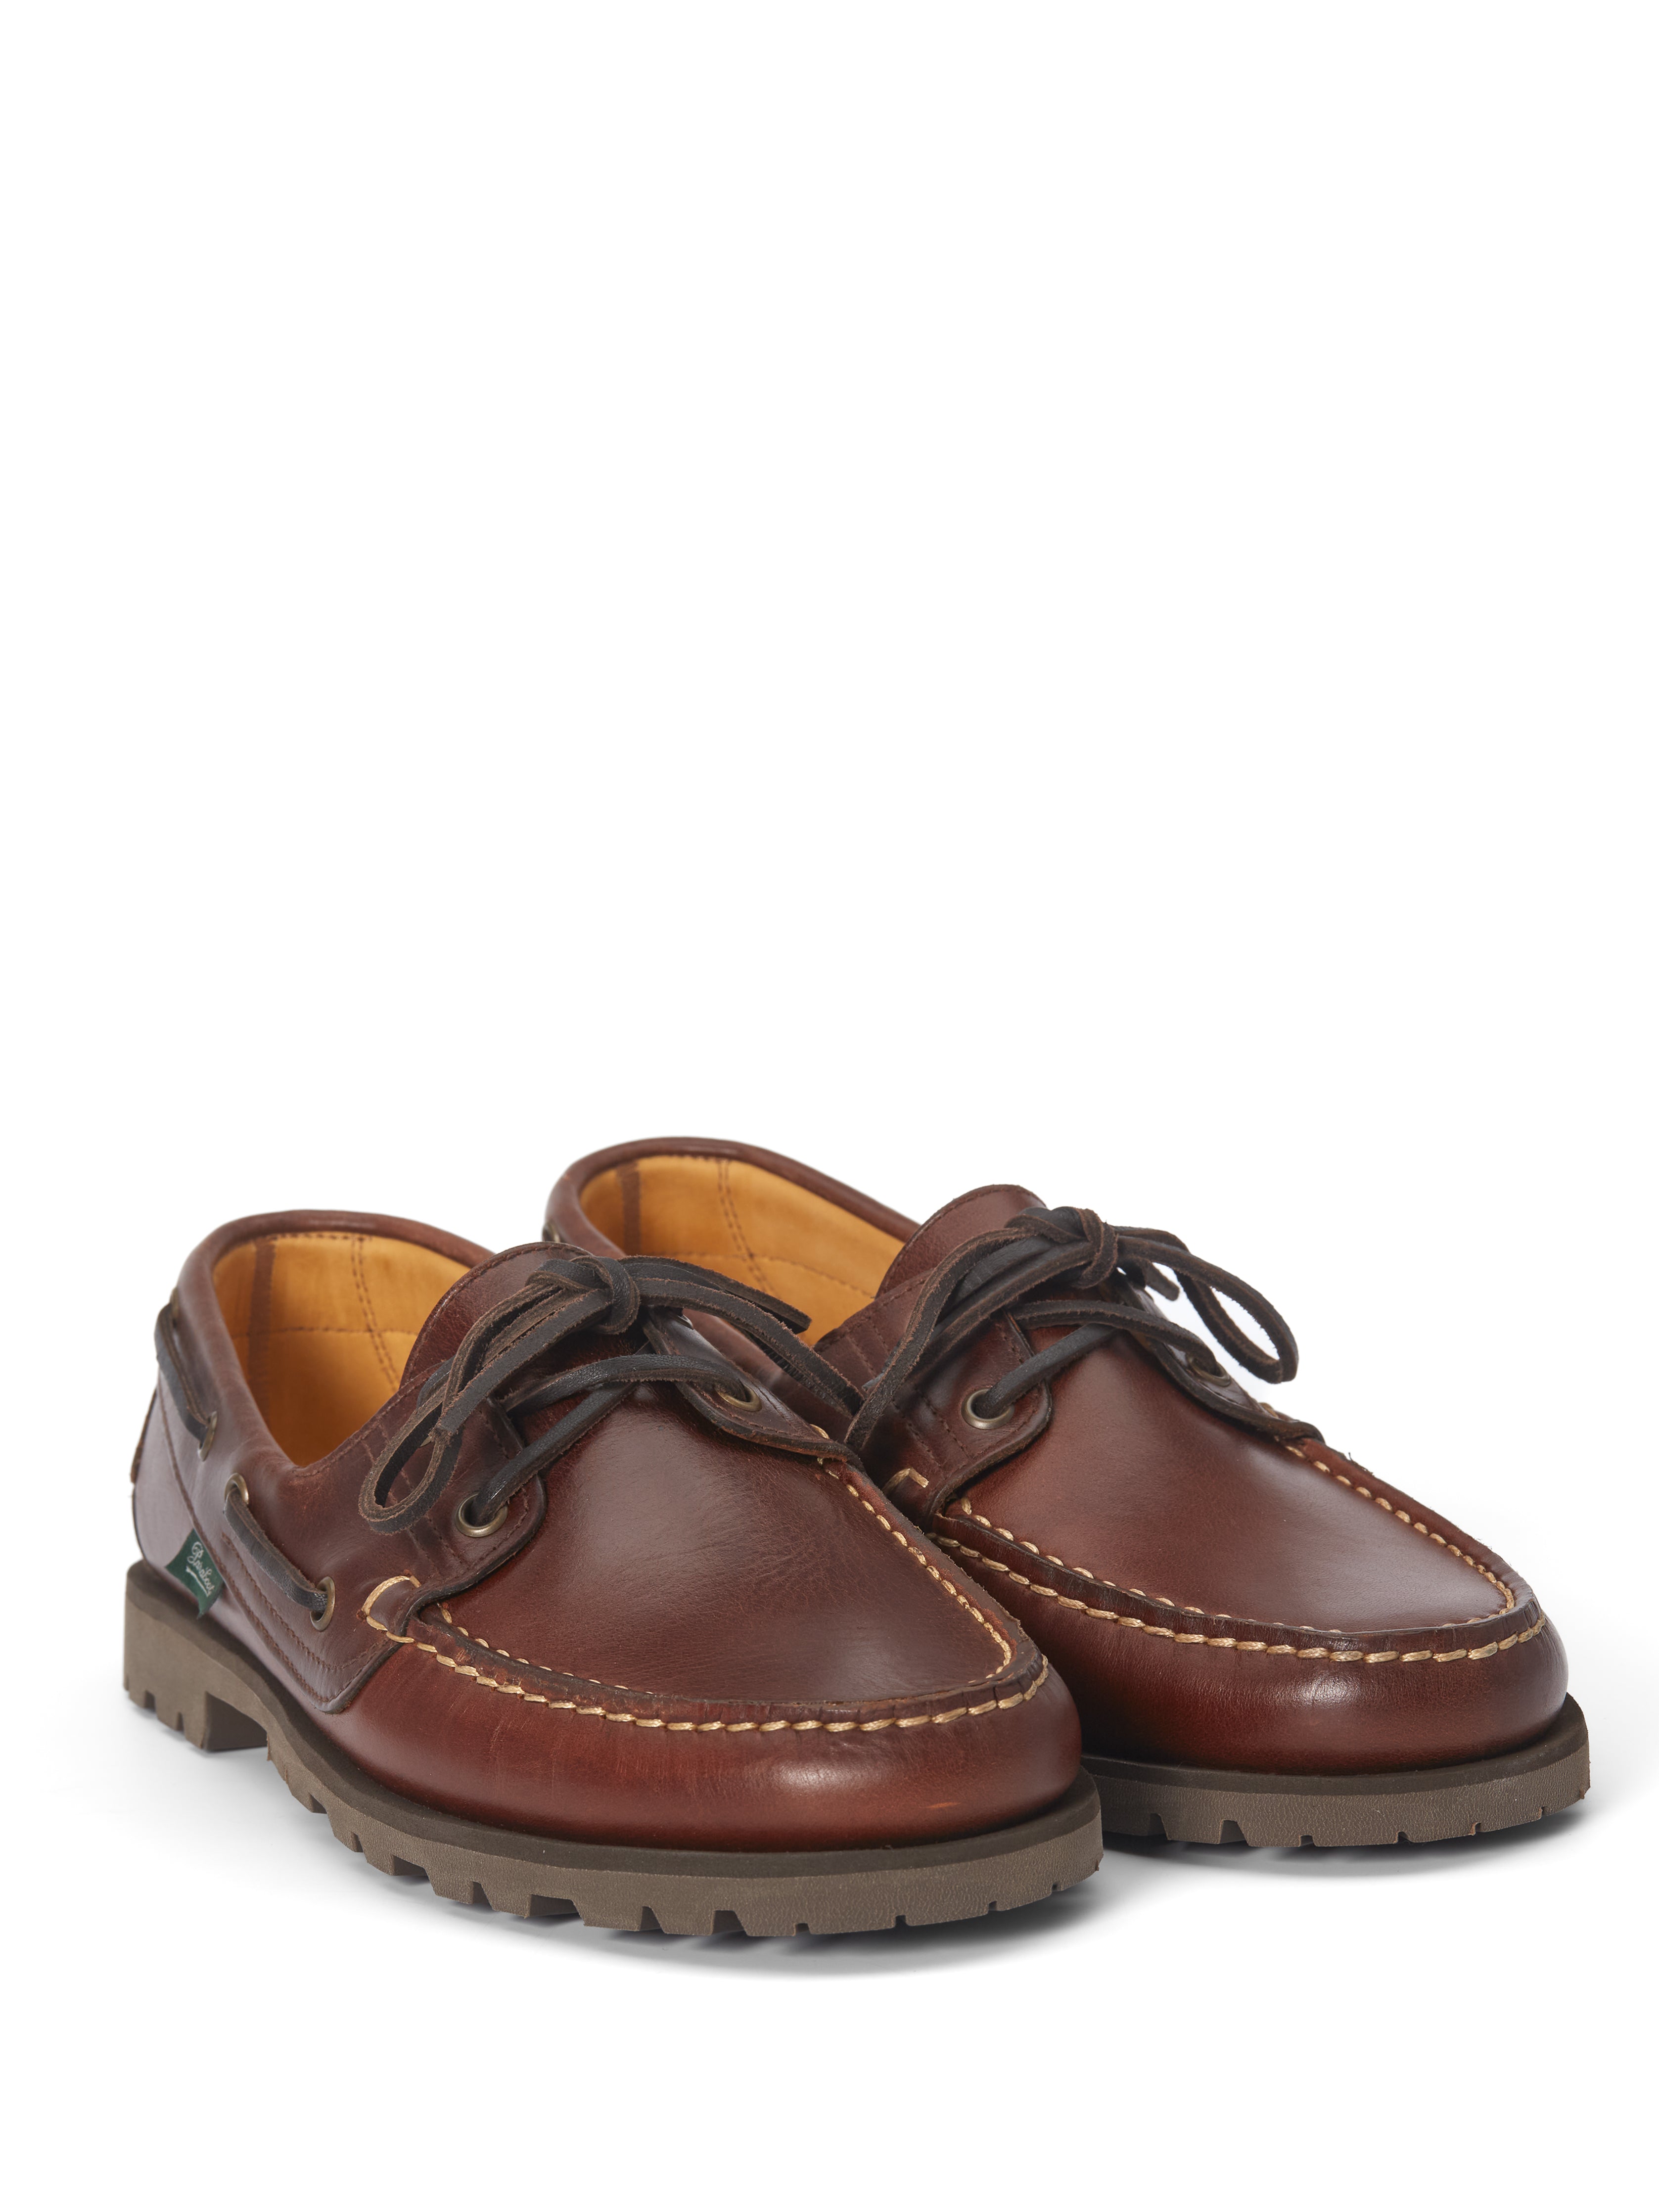 Paraboot Malo Oxblood Leather